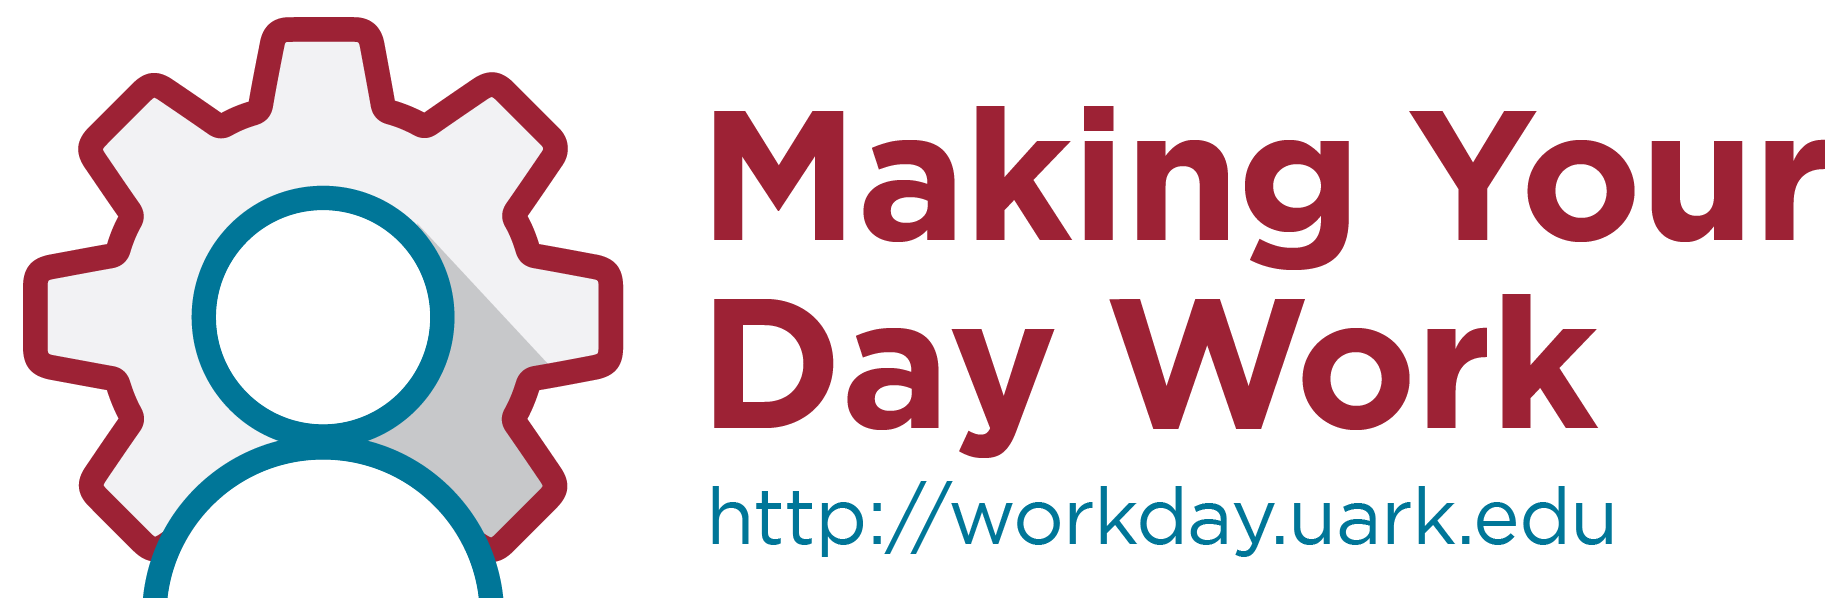 Making Your Day Work logo